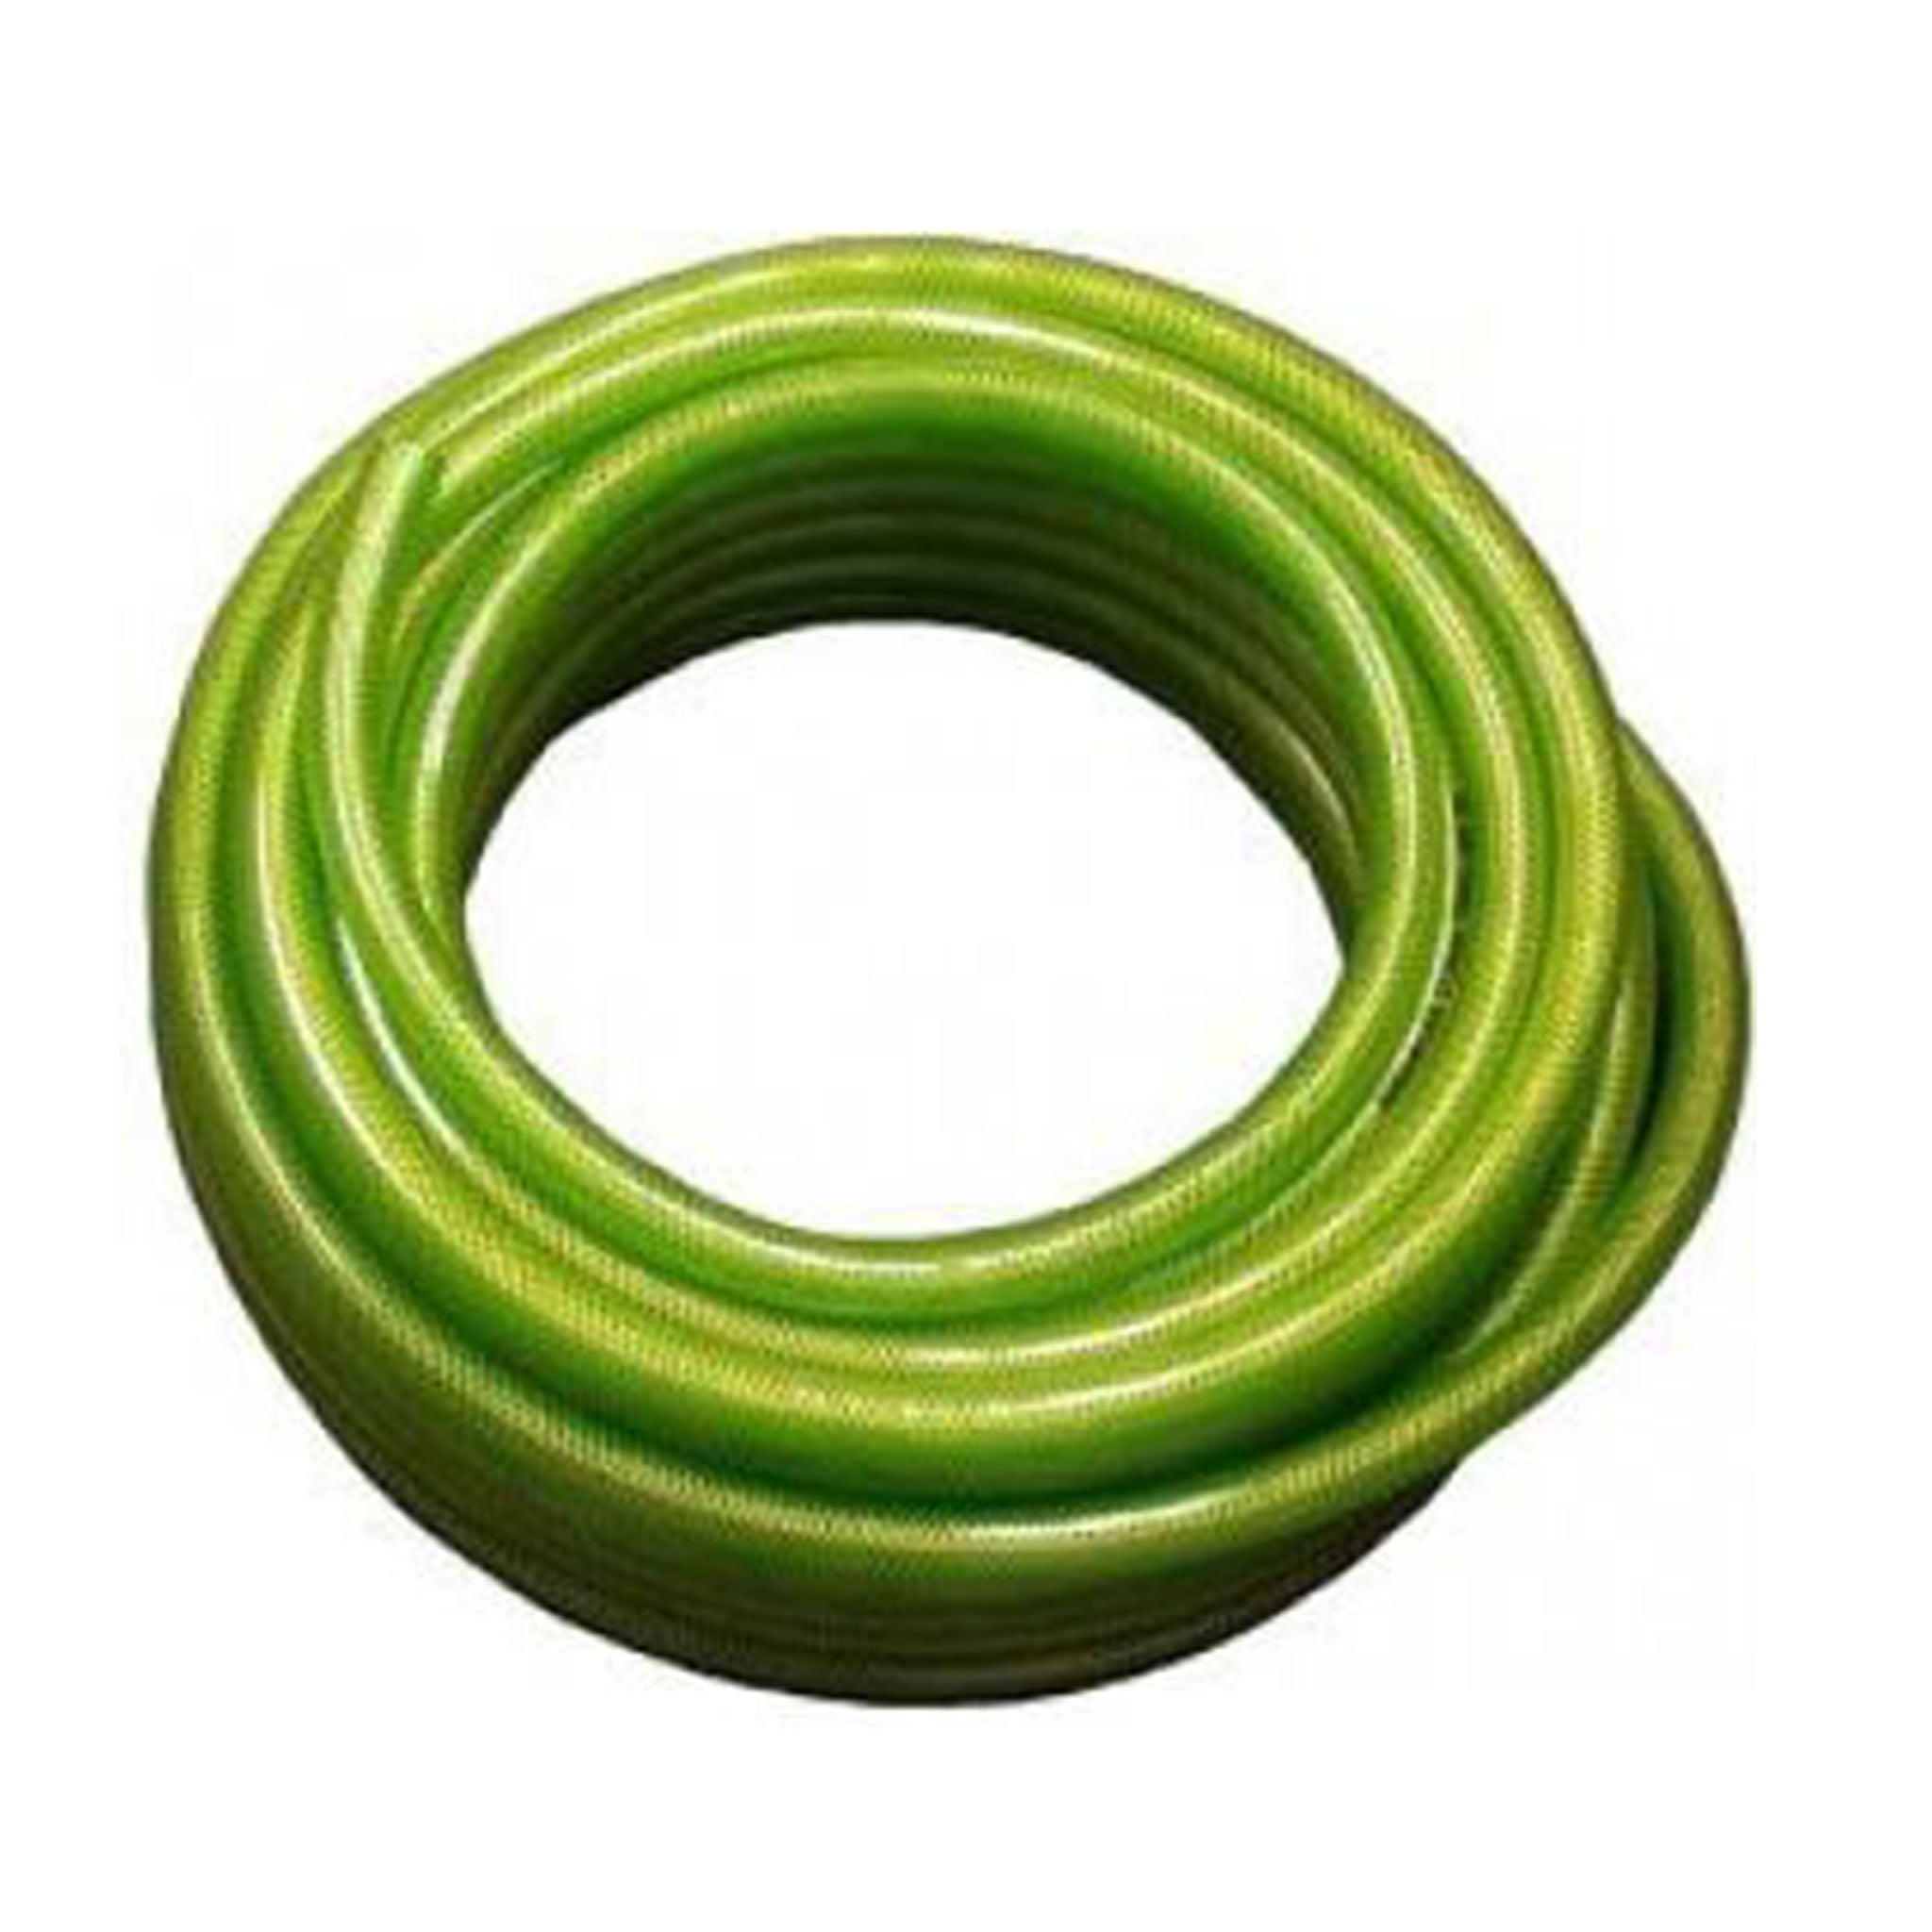 1/2'' Greenflex Water Supply Hose available in 2 lengths